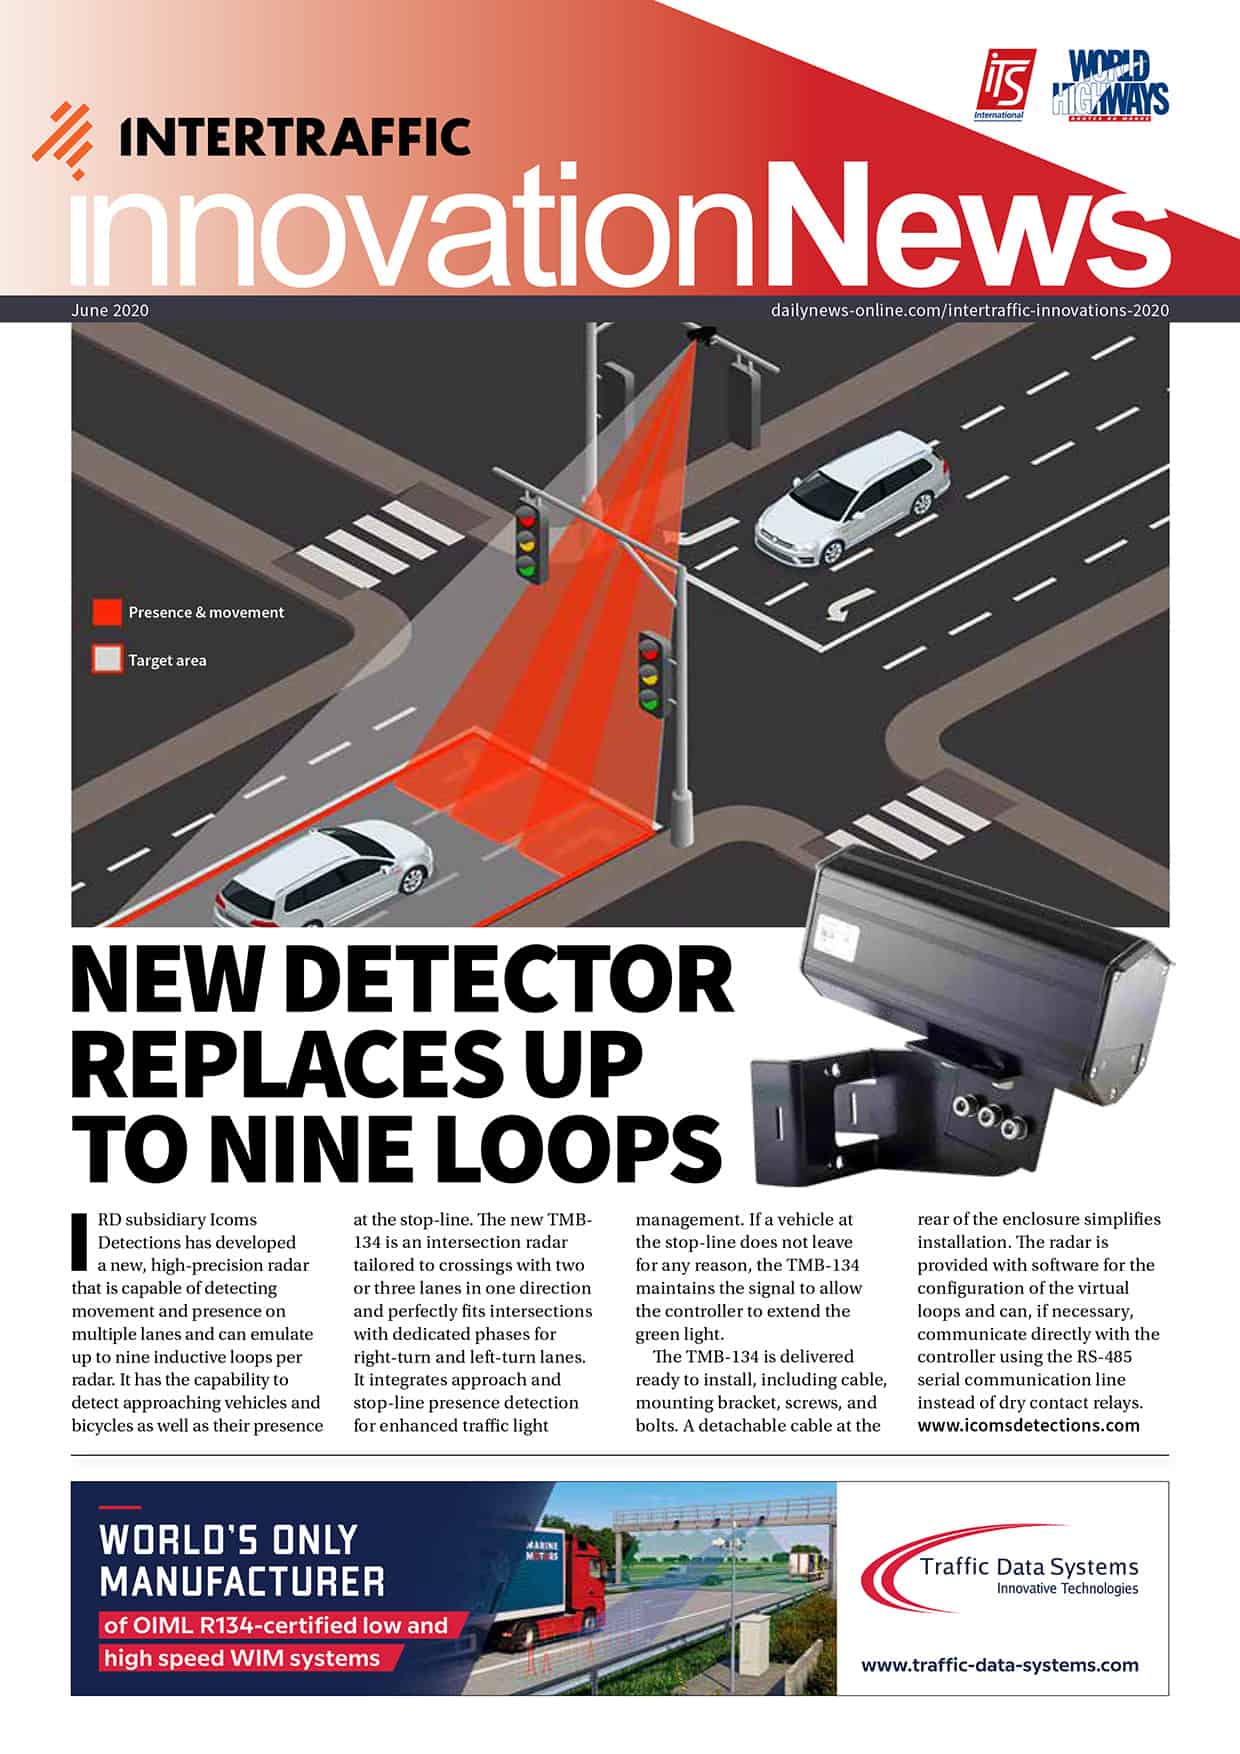 The TMB-134 on the front page of Intertraffic Innovation News